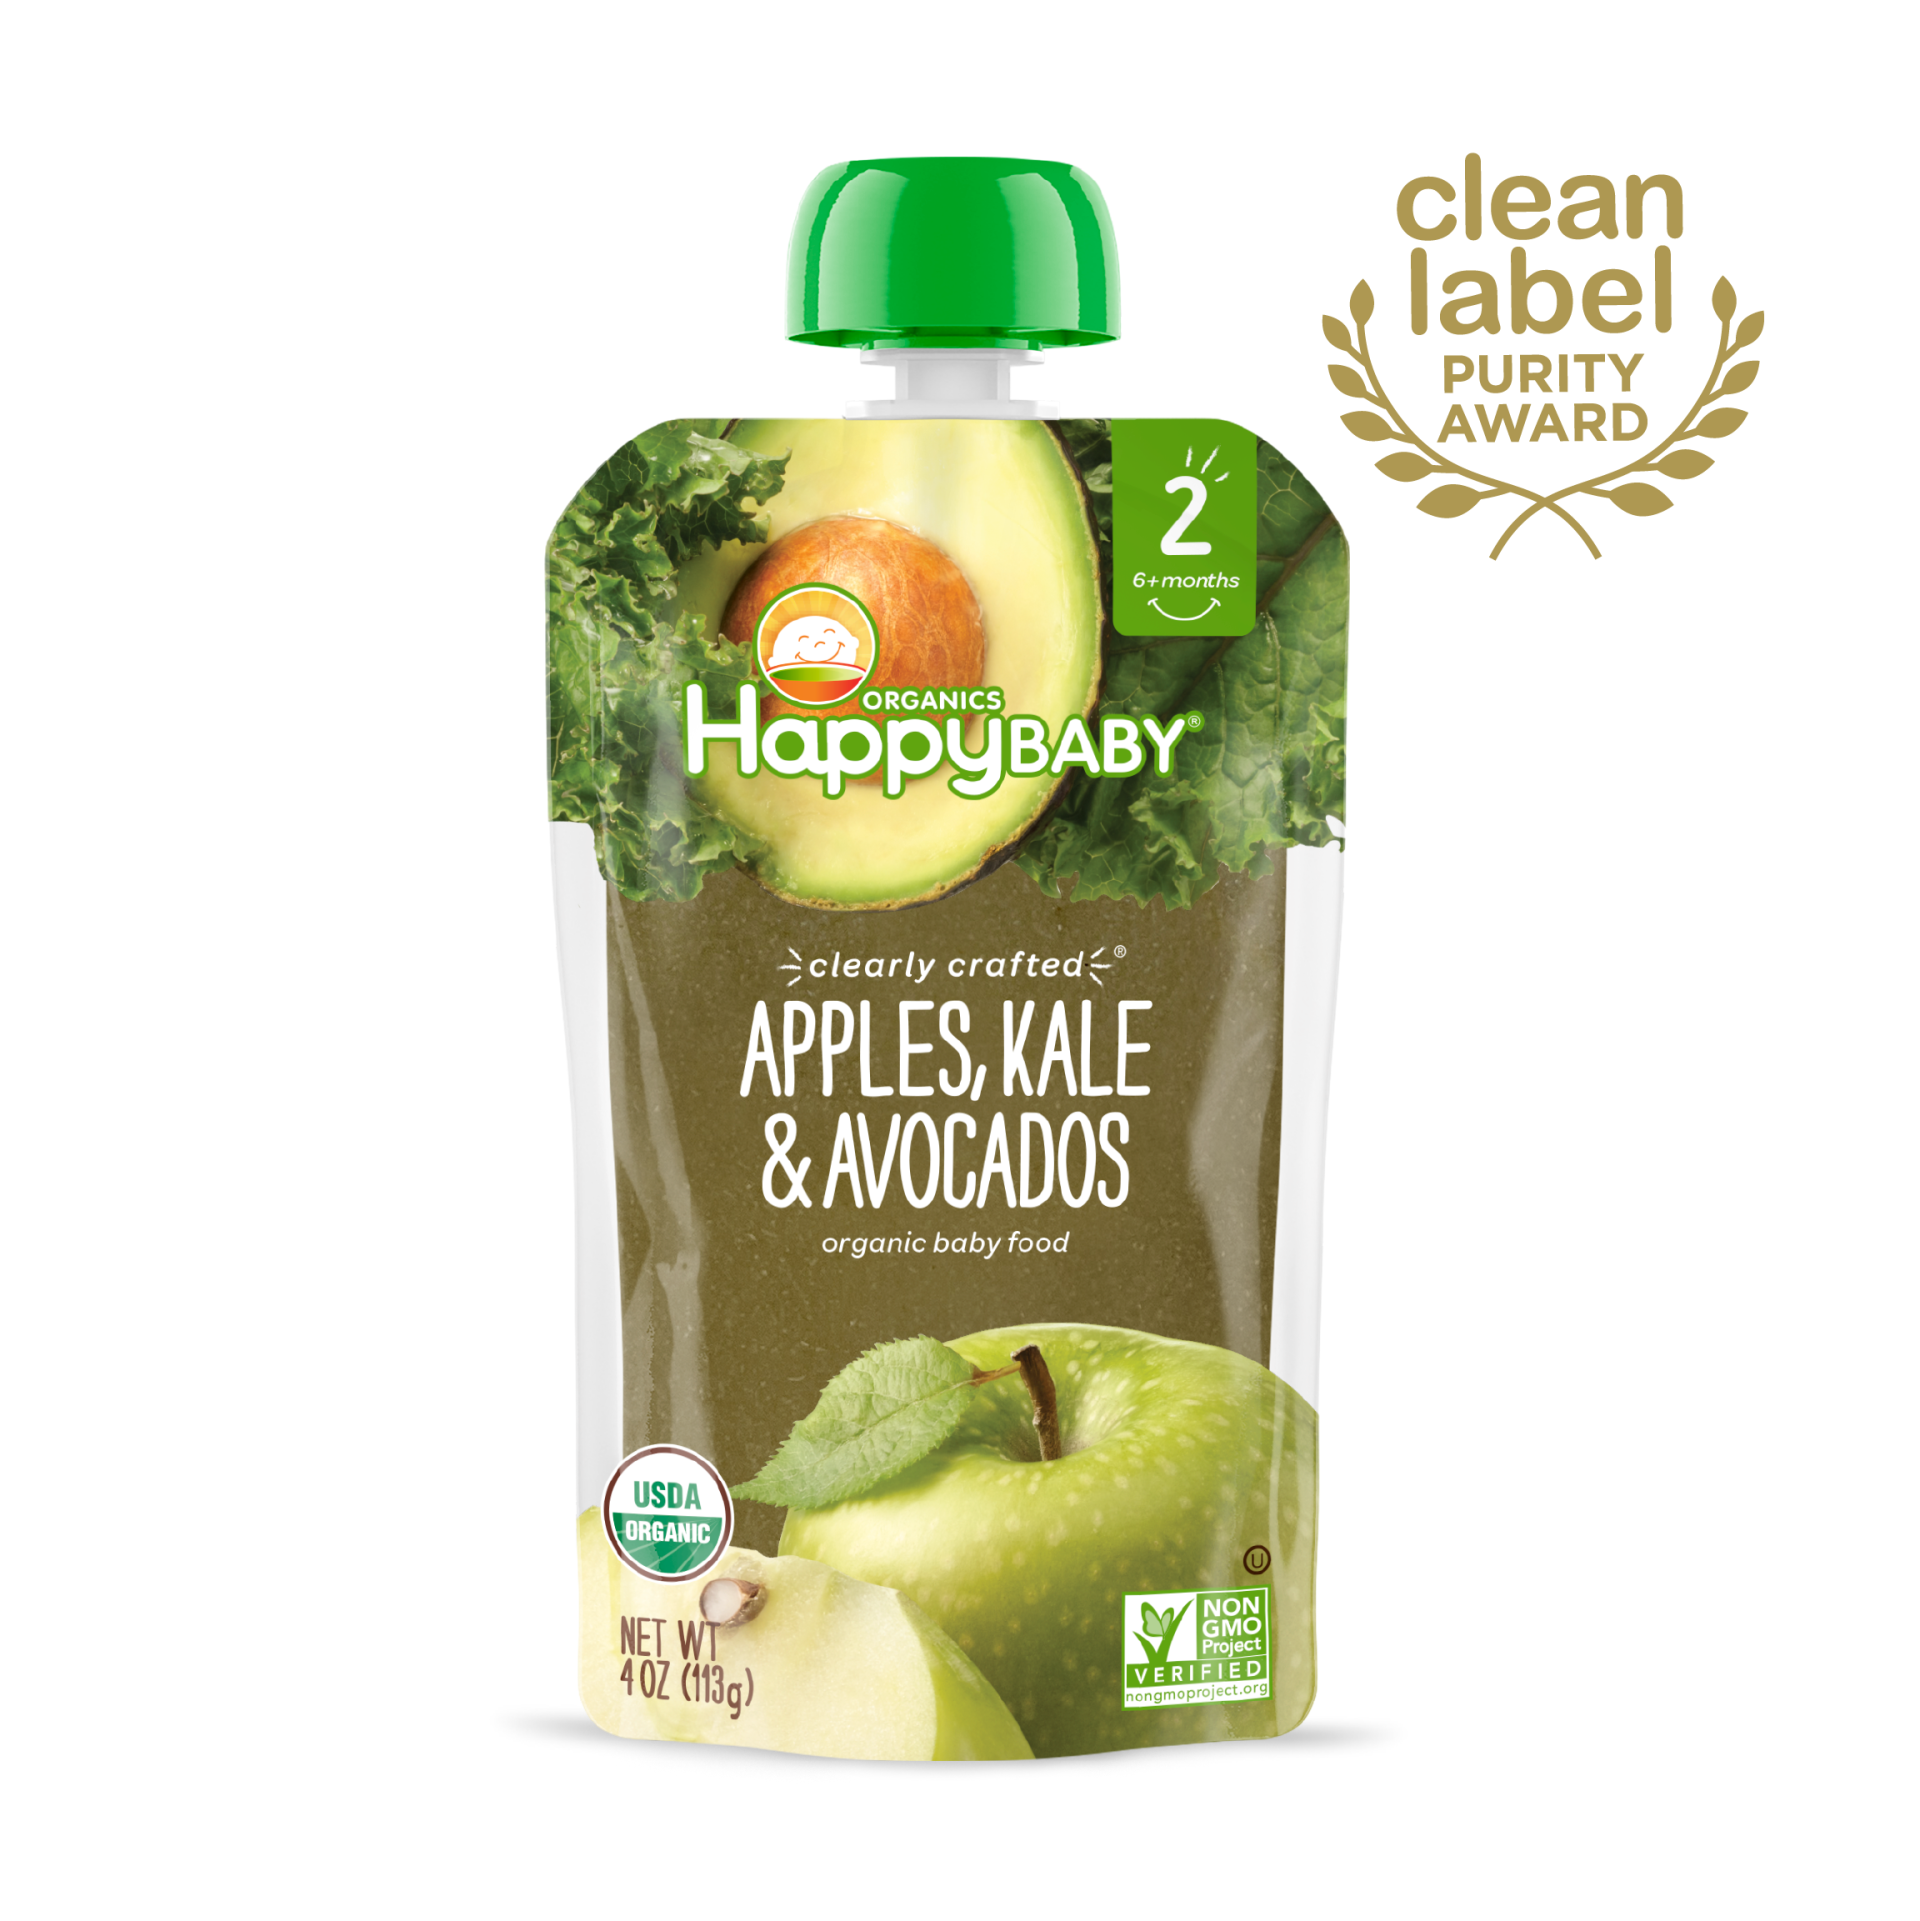 Happy Baby Stage 2 Apples, Kale & Avocados Pouch 16 units per case 4.0 oz